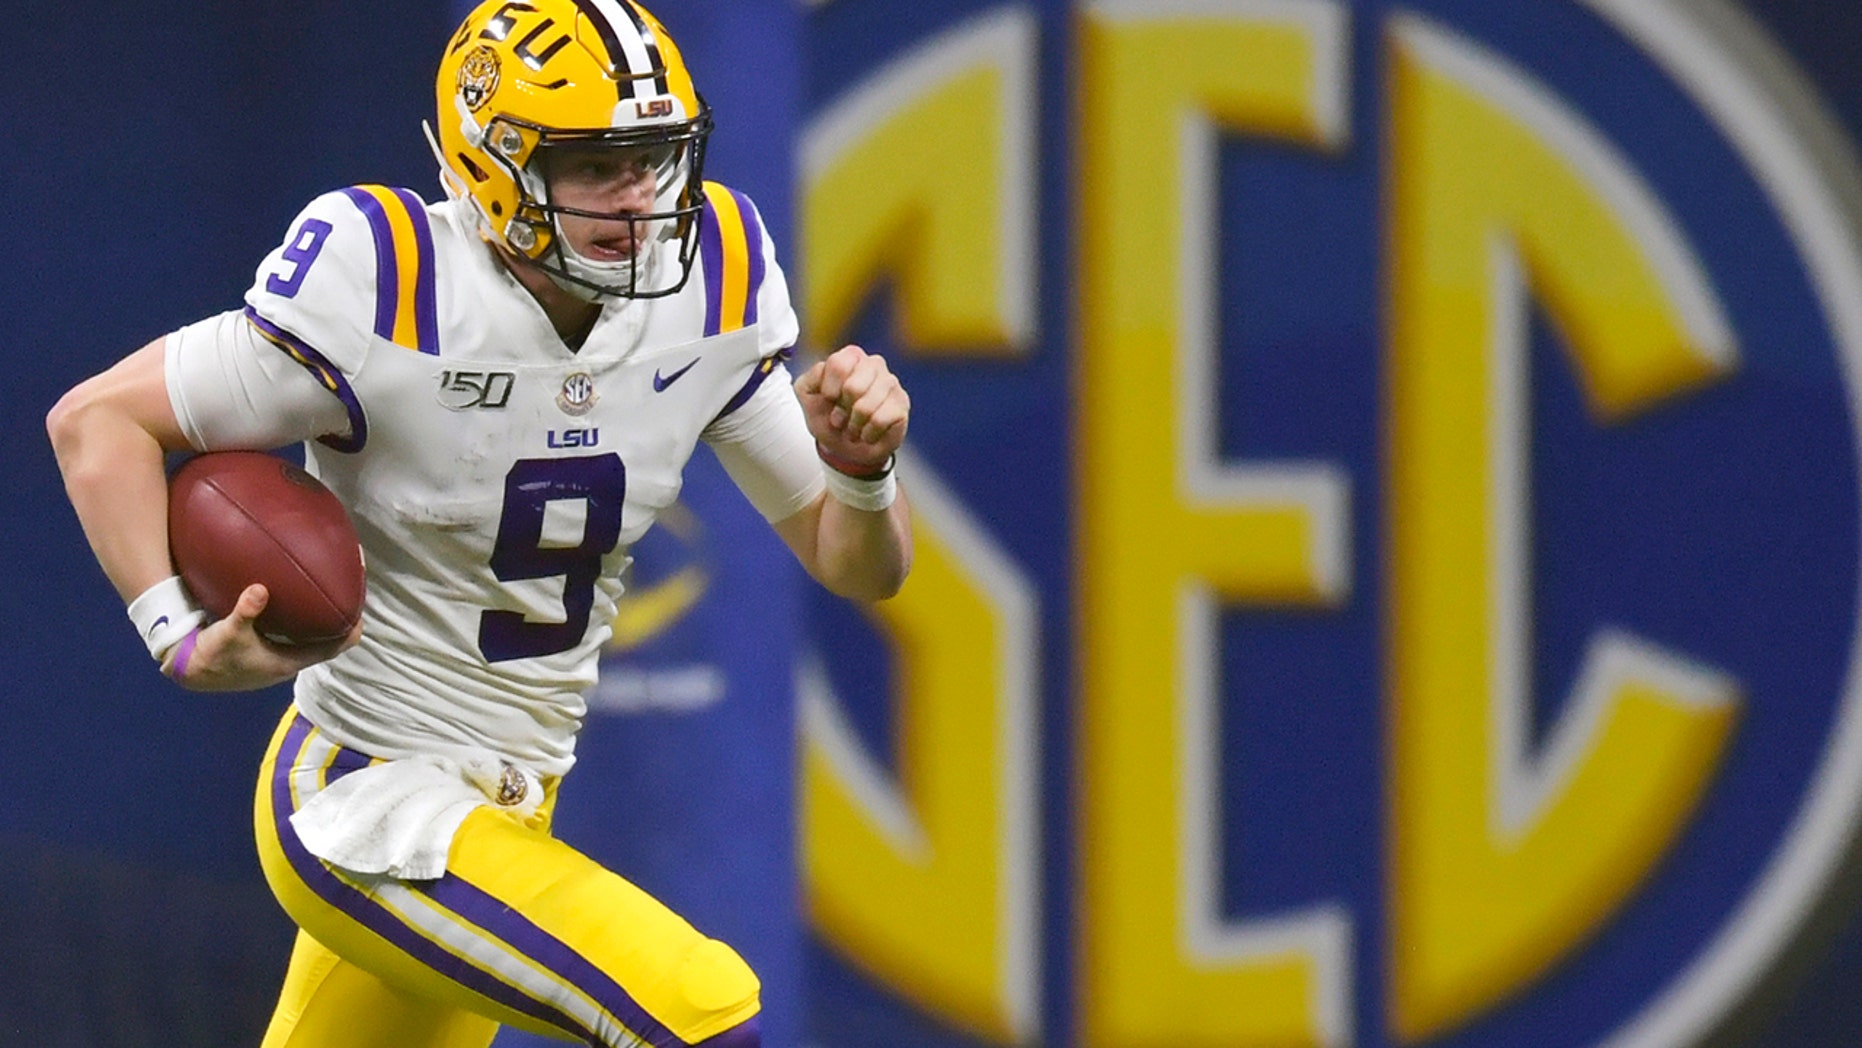 FILE - In this Dec. 7, 2019, file photo, LSU quarterback Joe Burrow (9) runs against Georgia during the second half of the Southeastern Conference championship NCAA college football game, in Atlanta. Burrow is a unanimous selection as the offensive player of the year on The Associated Press All-Southeastern Conference football team, Monday, Dec. 9, 2019. (AP Photo/Mike Stewart, File)